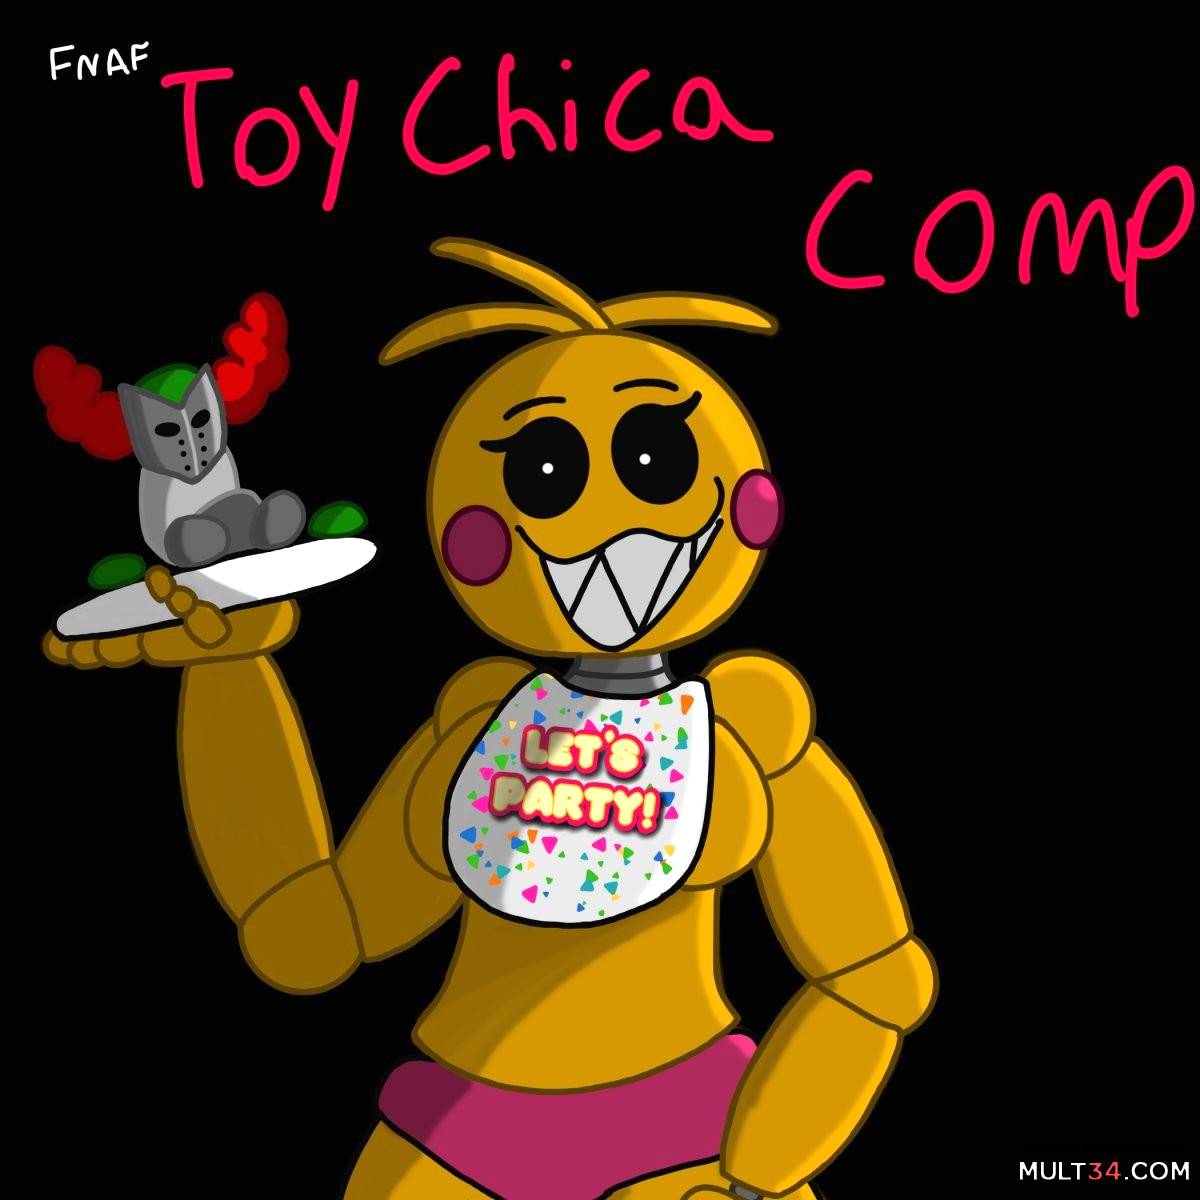 The Ultimate Toy Chica Compilation porn comic - the best cartoon porn  comics, Rule 34 | MULT34